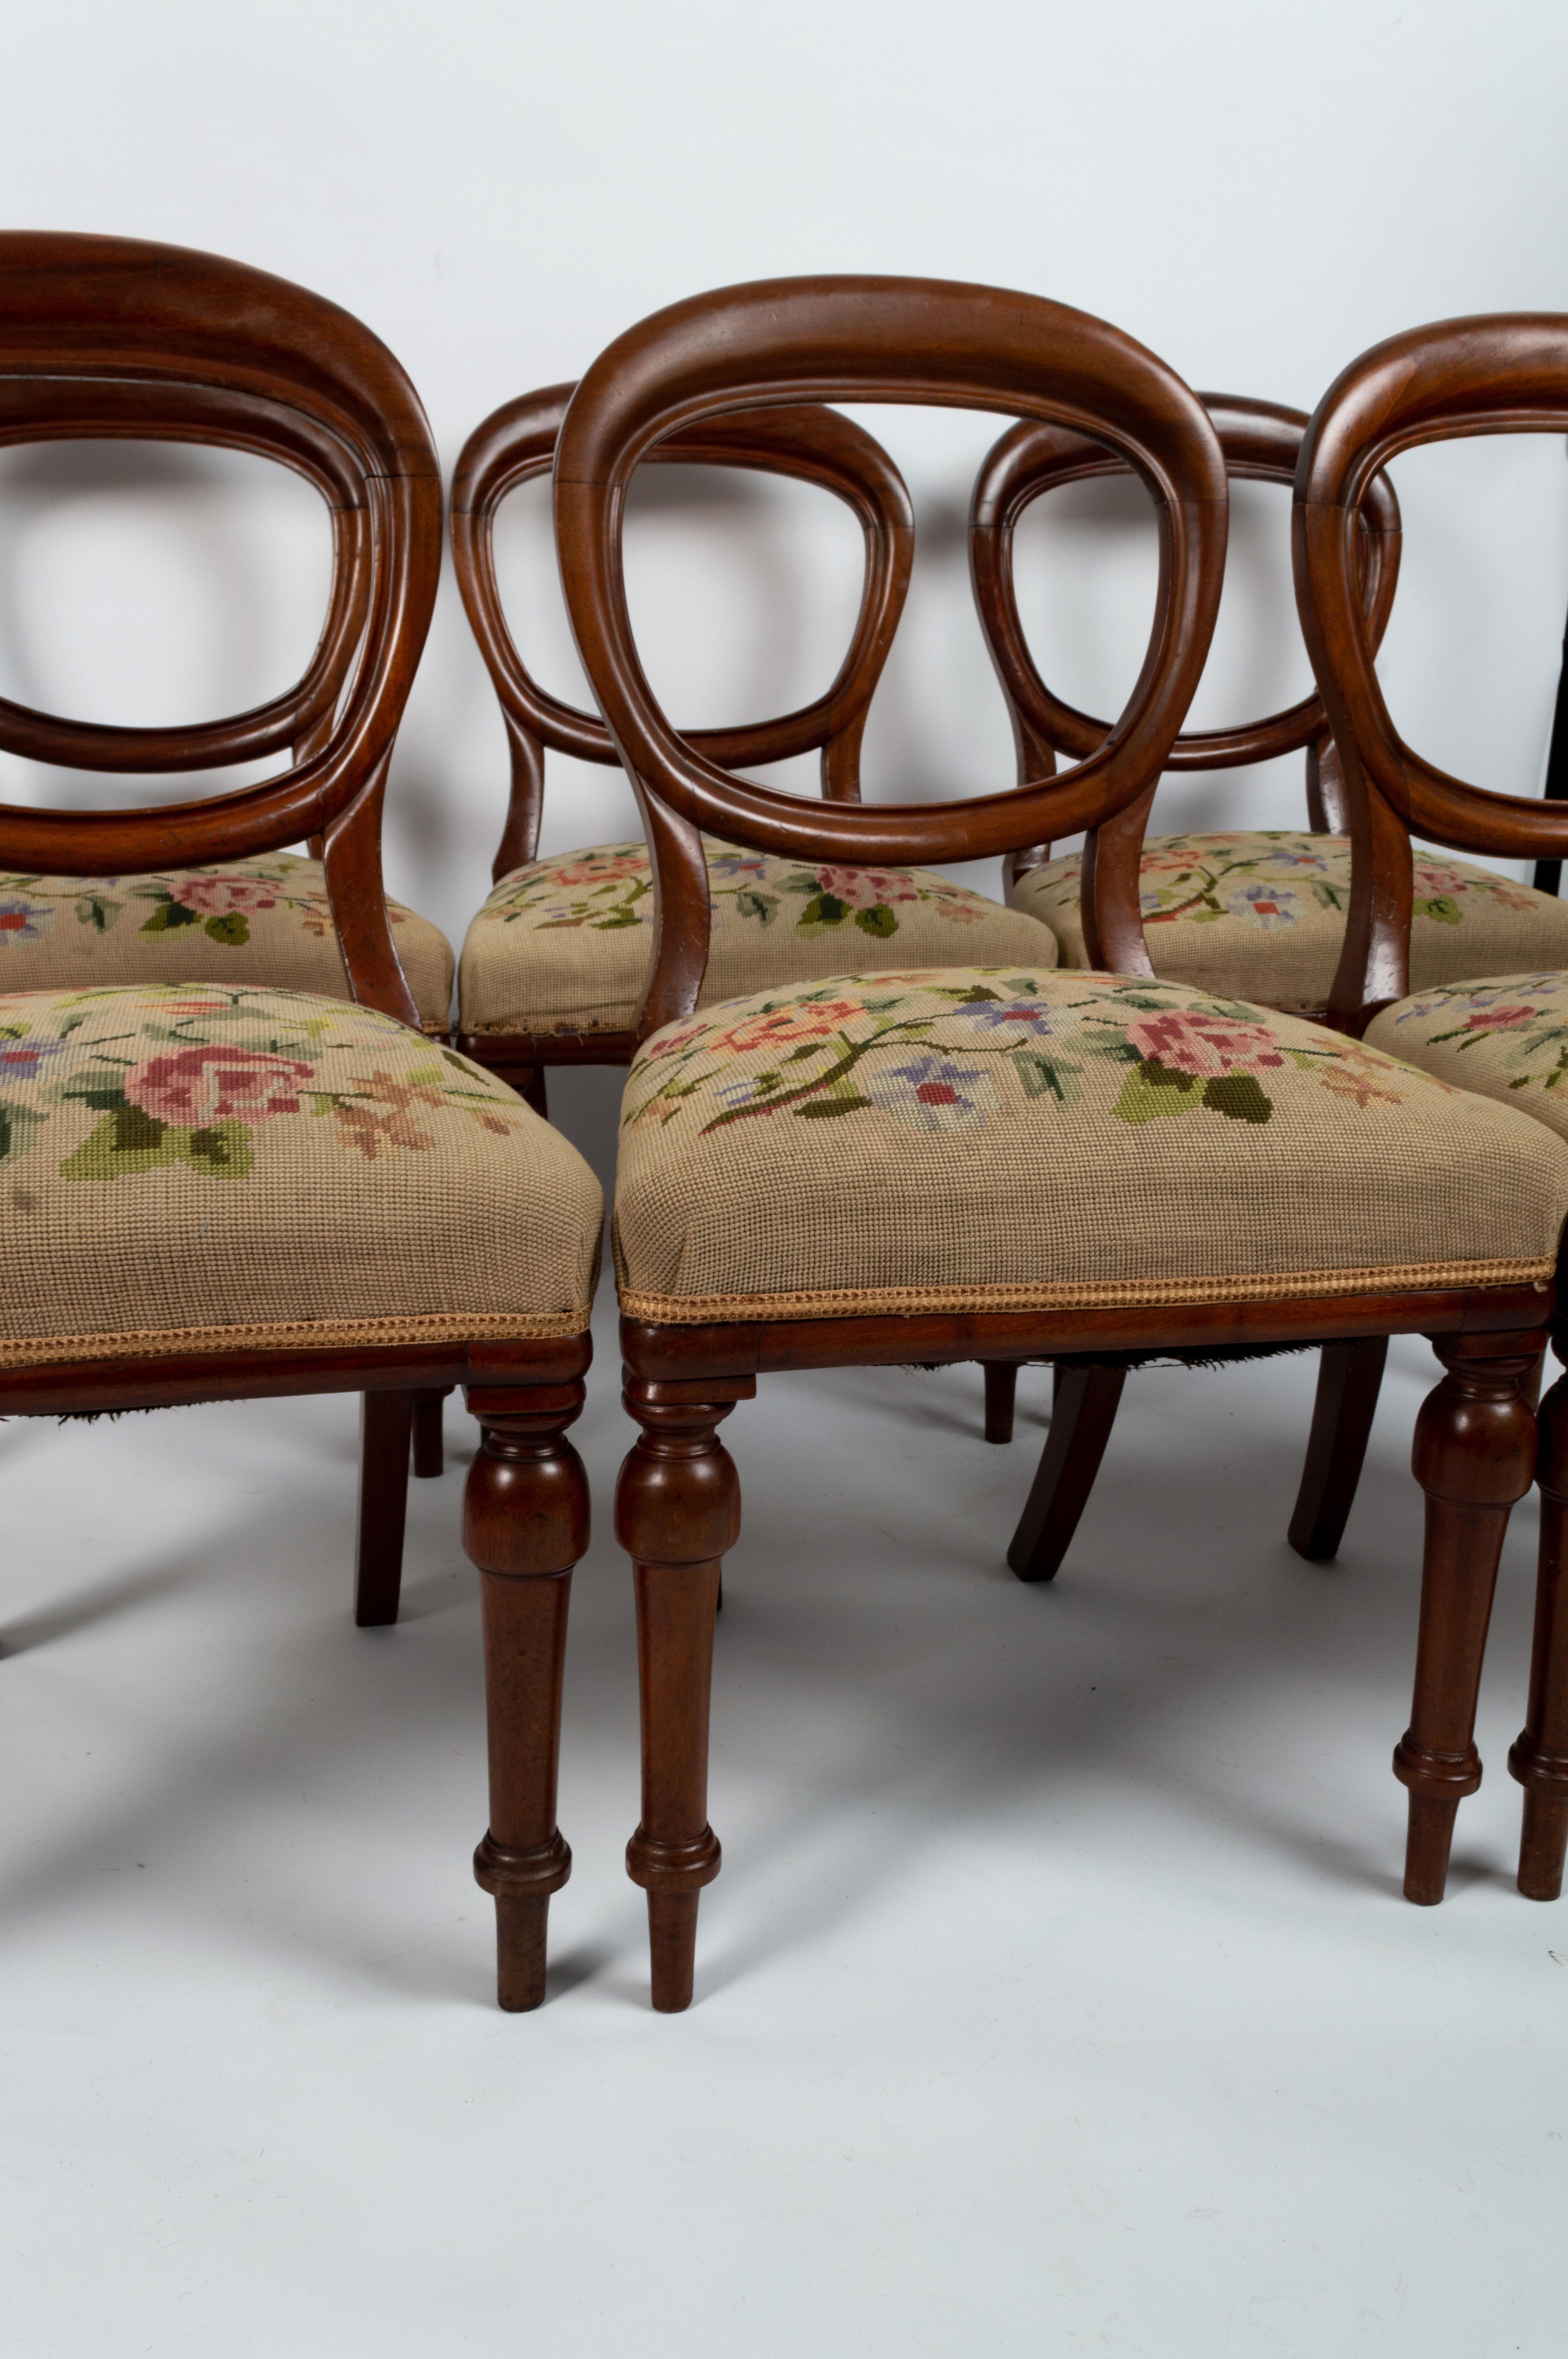 Set of Six Antique English 19th Century Mahogany Balloon Back Chairs circa 1860 For Sale 3